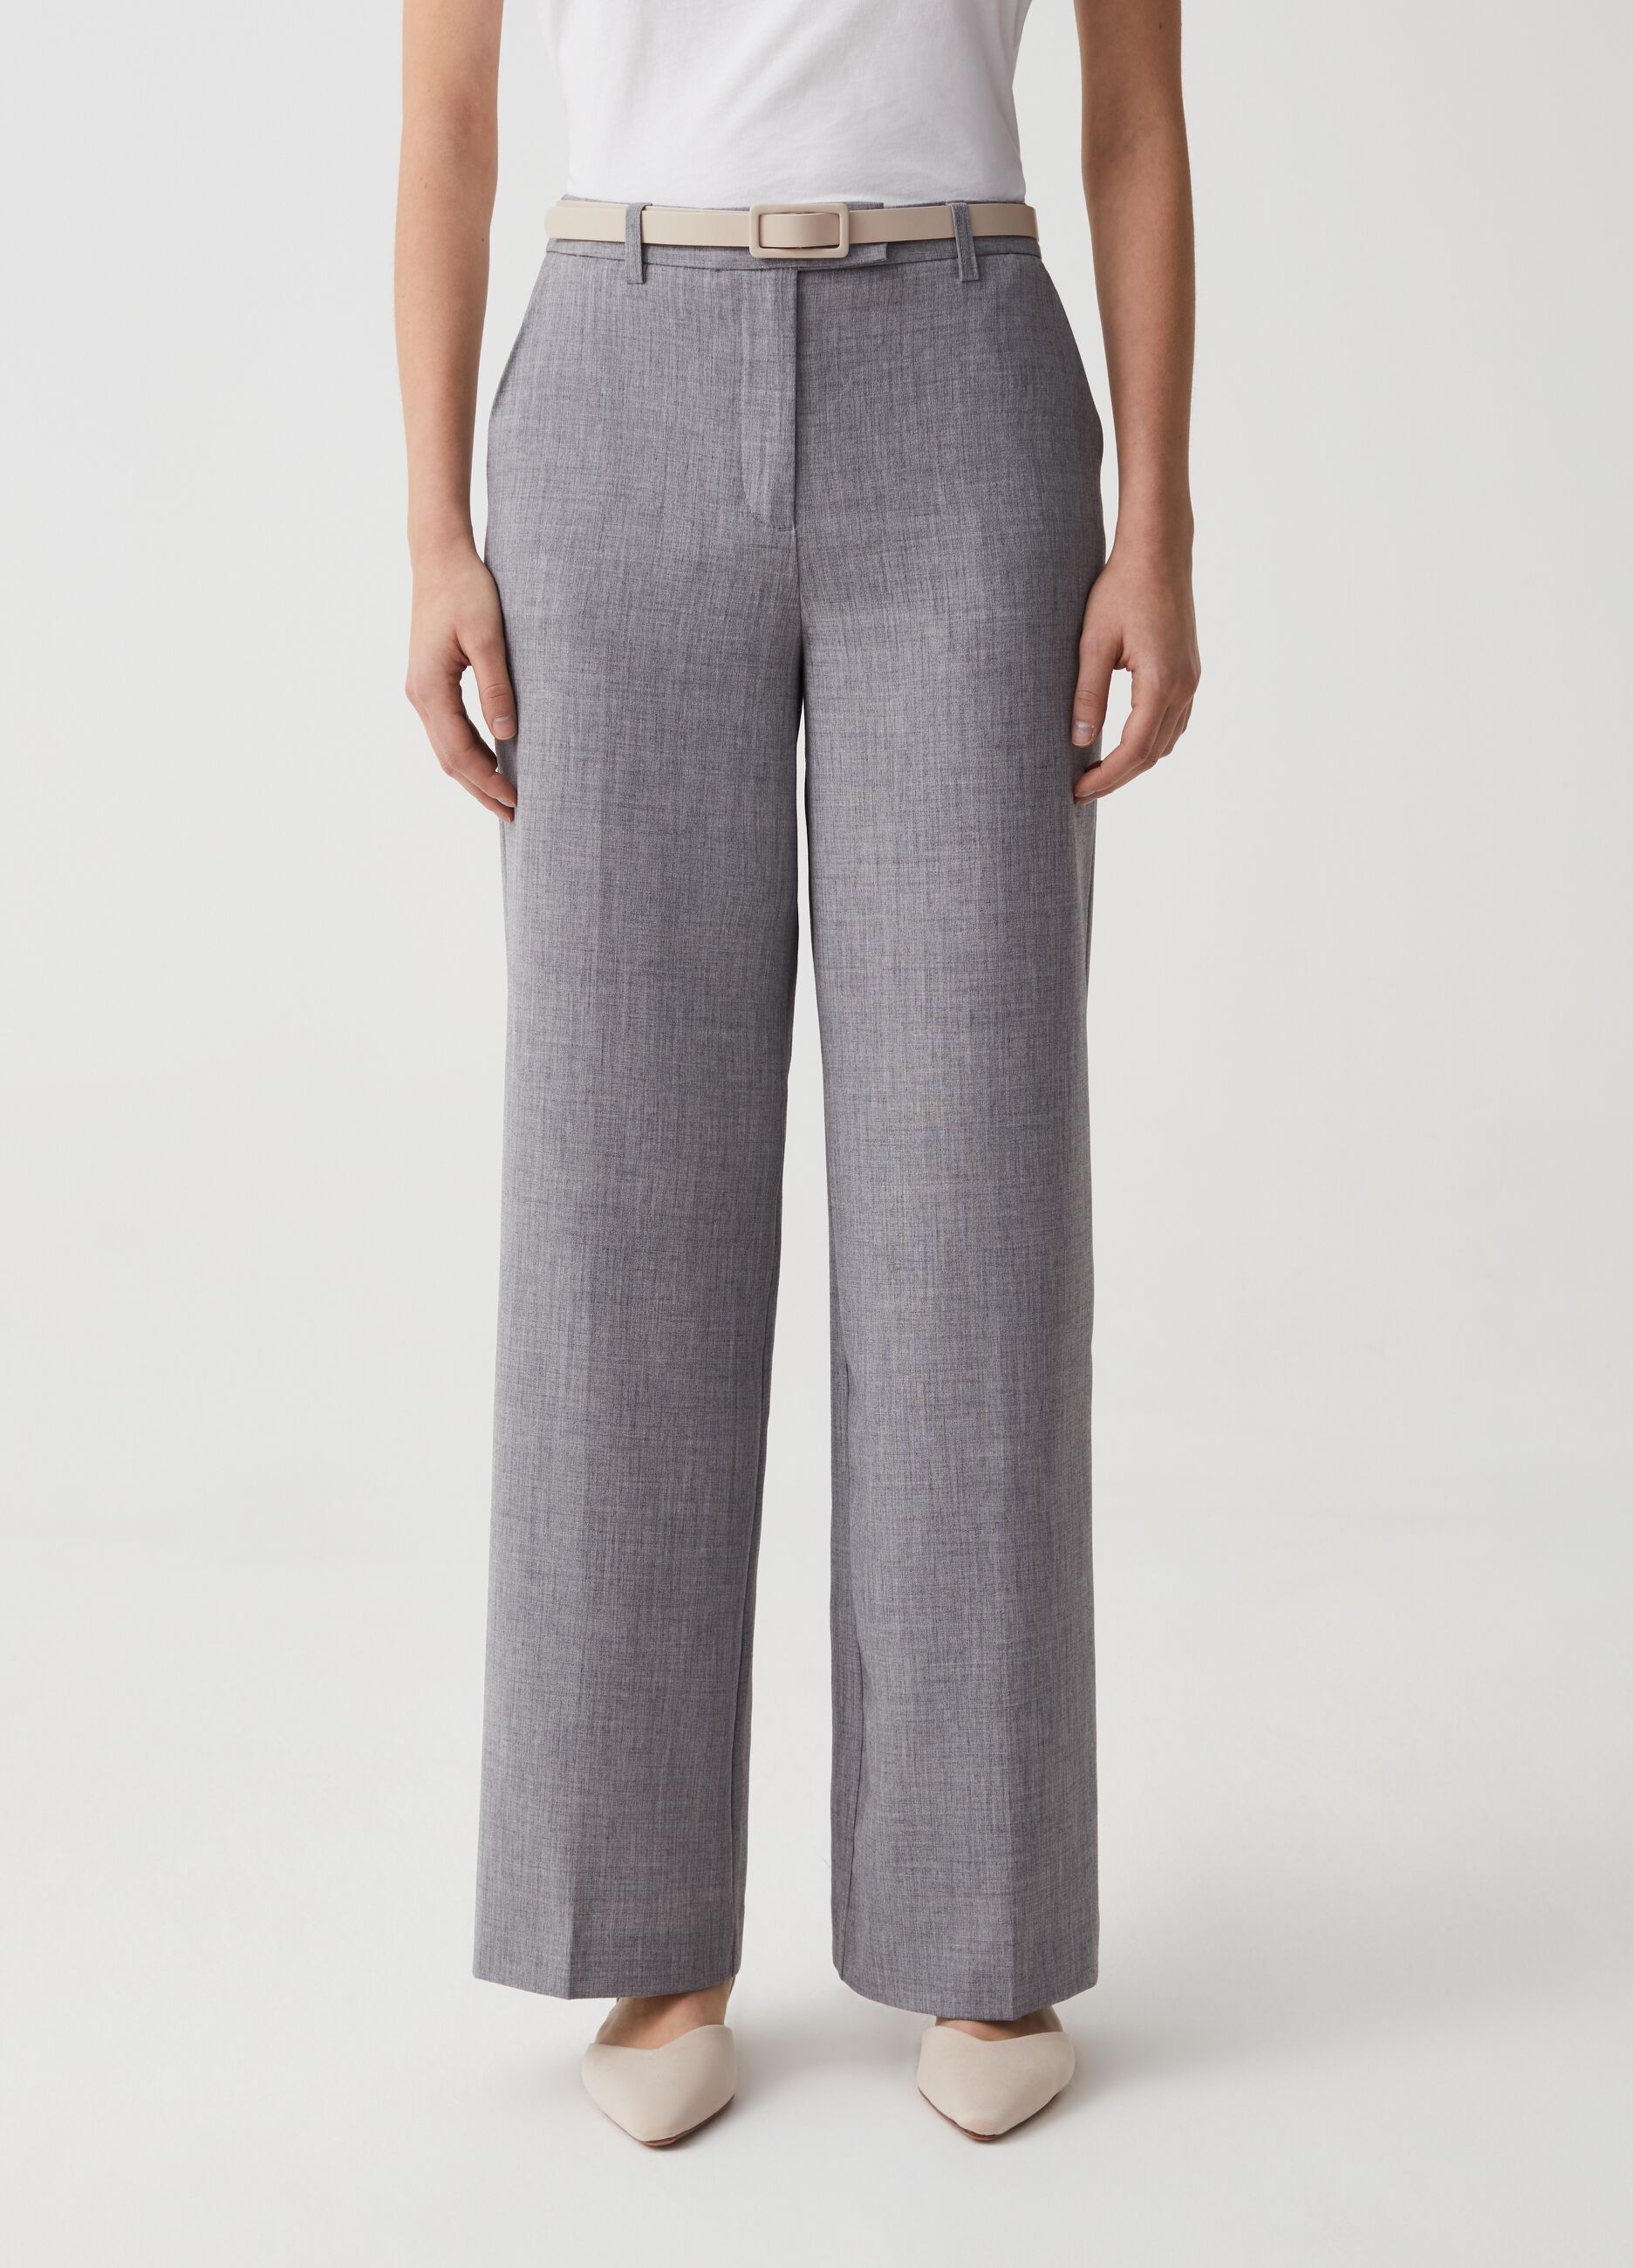 Wide-leg trousers with skinny belt